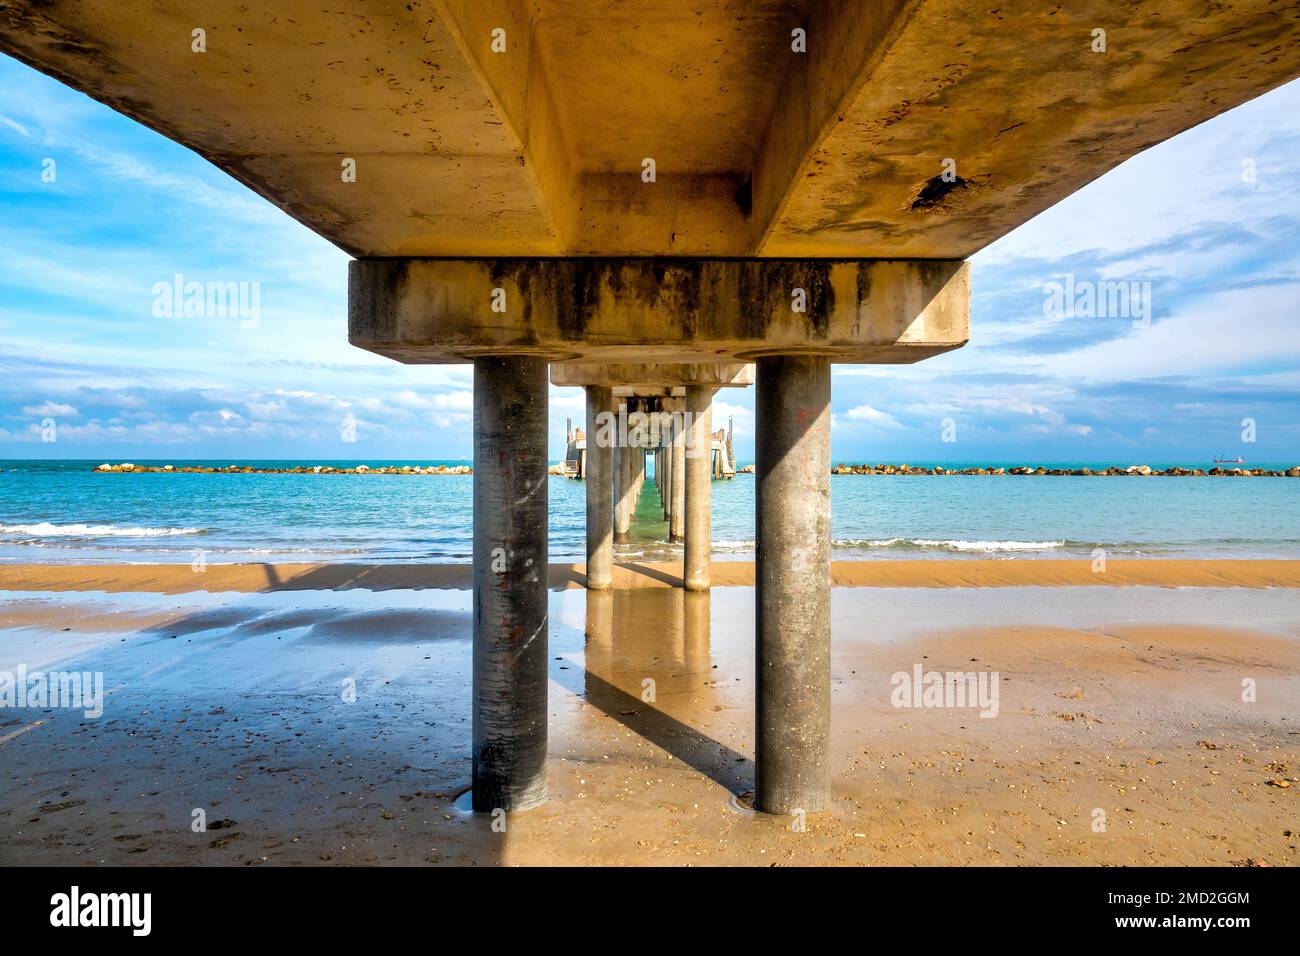 View of the Pontile Sirena from below,  Francavilla al mare, Italy Stock Photo